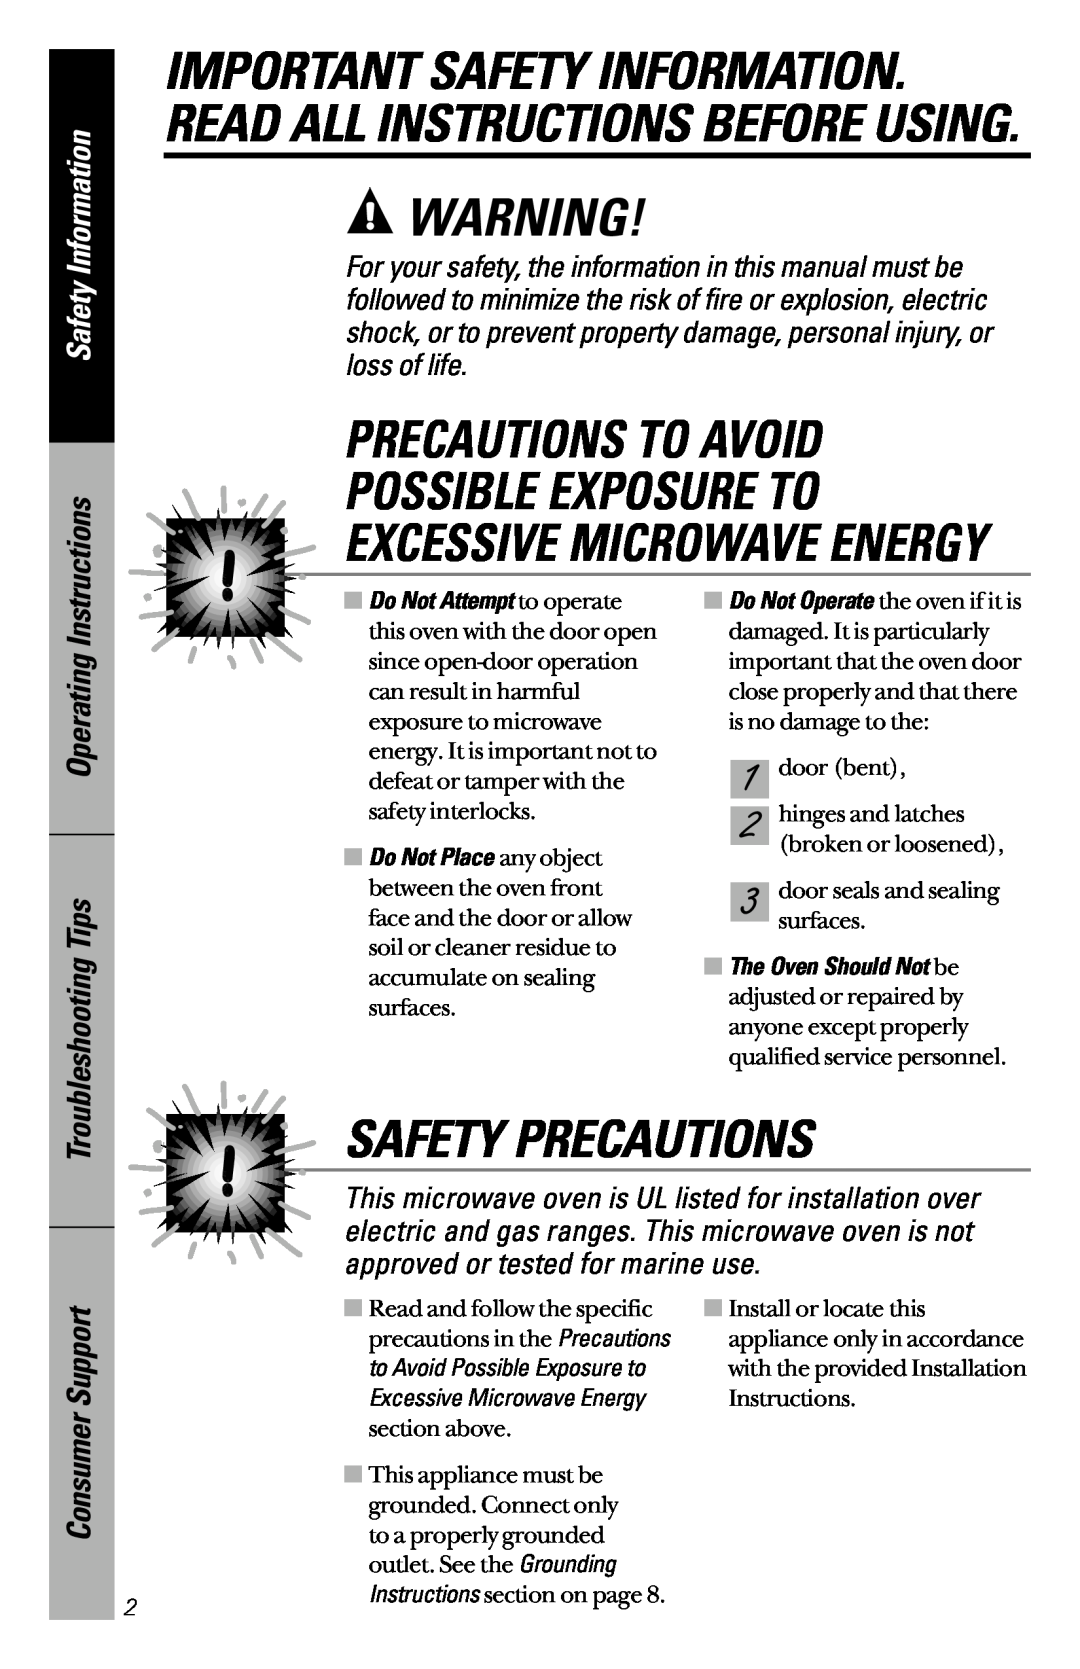 GE JVM1841 Precautions To Avoid Possible Exposure To, Safety Precautions, Excessive Microwave Energy, Safety Information 